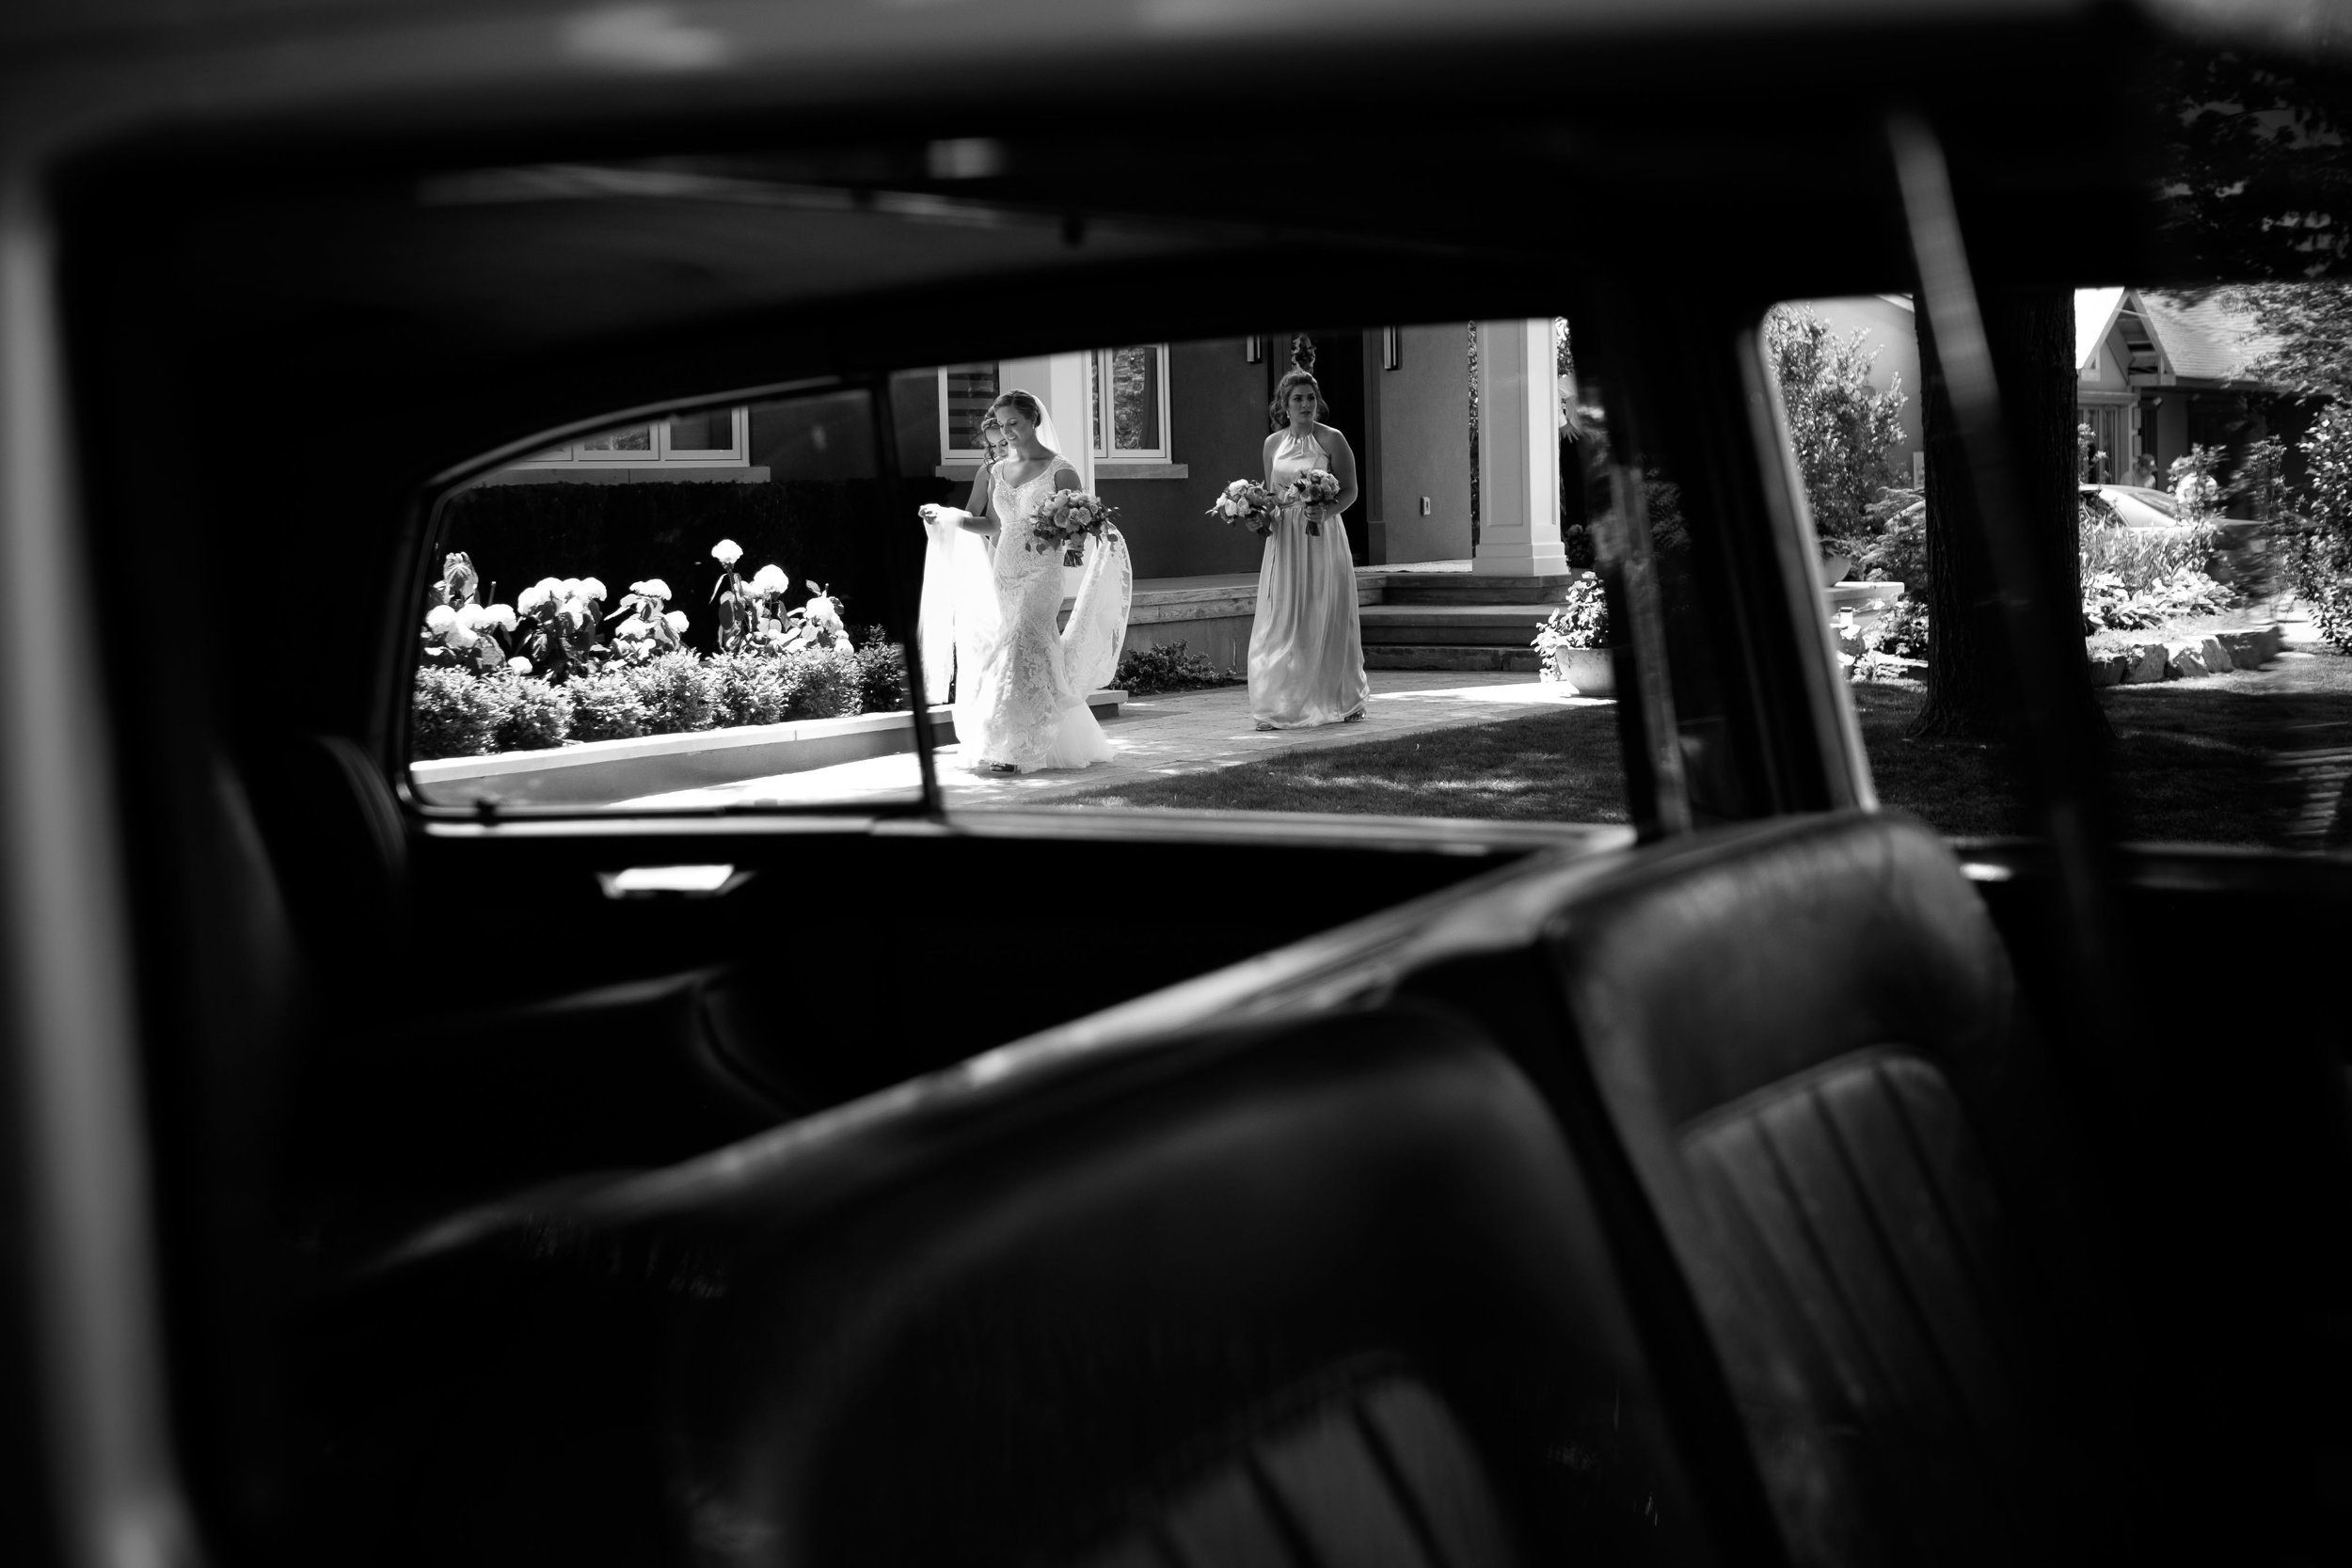  Sabrina leaves her parents house to ride in a classic Rolls Royce before her wedding ceremony. 